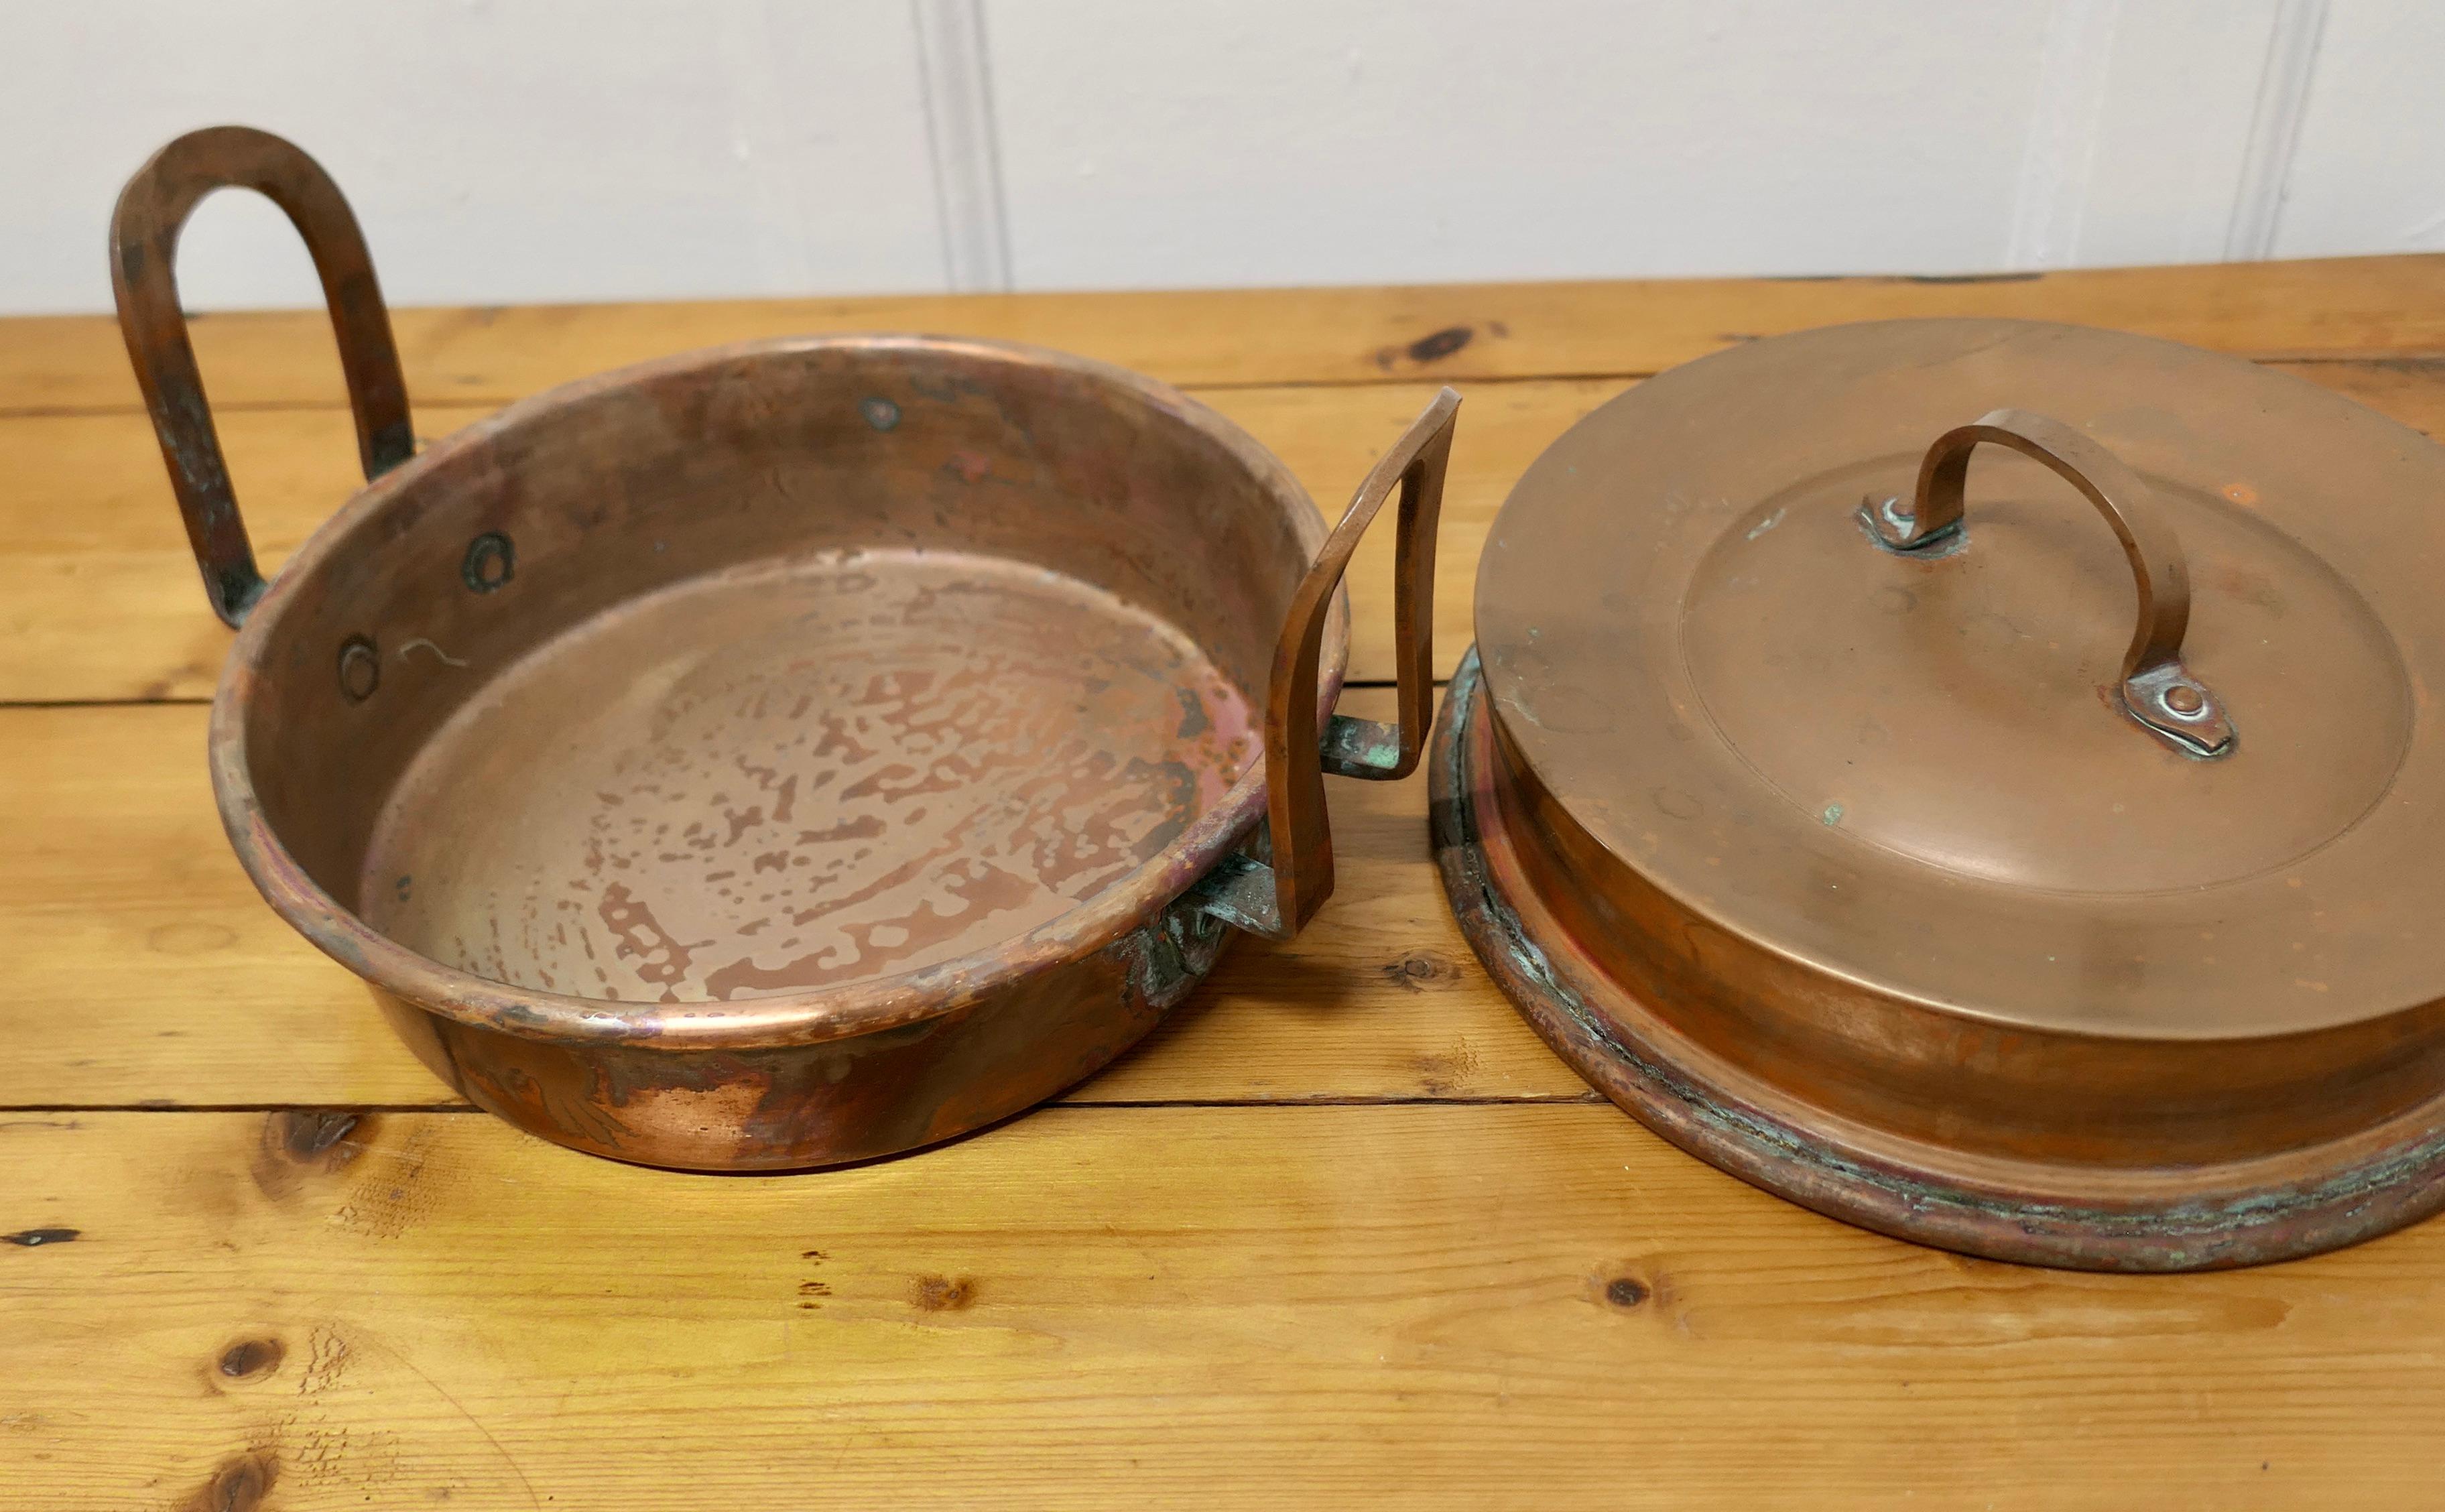 Round 19th Century Copper Steaming or Warming Pan with Lid 

This is a lovely looking 19th Century Pot it has a wide rim so that it can be suspended over water instead of being placed directly on the heat. 
The pan has long handles and a well